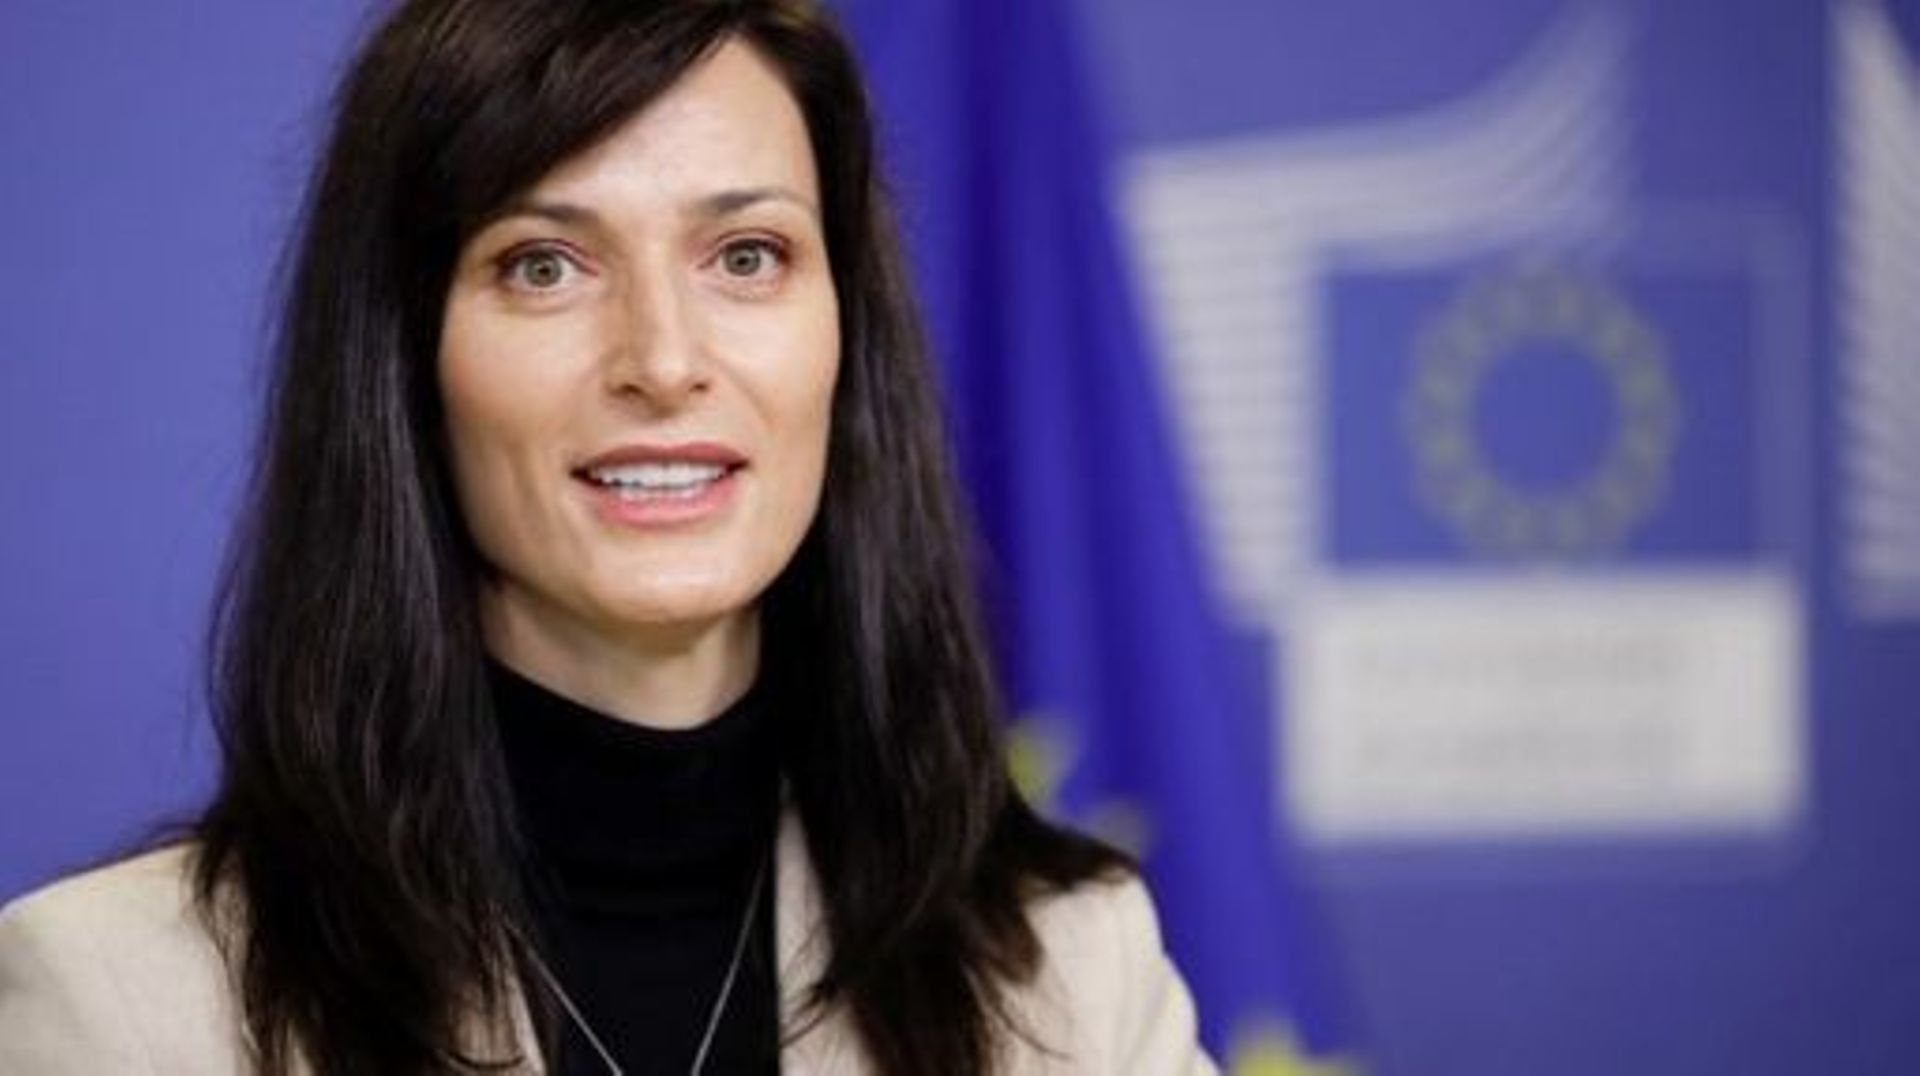 European Union Commissioner for Innovation, Research, Culture, Education and Youth Mariya Gabriel speaks during a press conference in Brussels on February 9, 2022 after the Commission adopted today the 2022 work programme of the European Innovation Counci